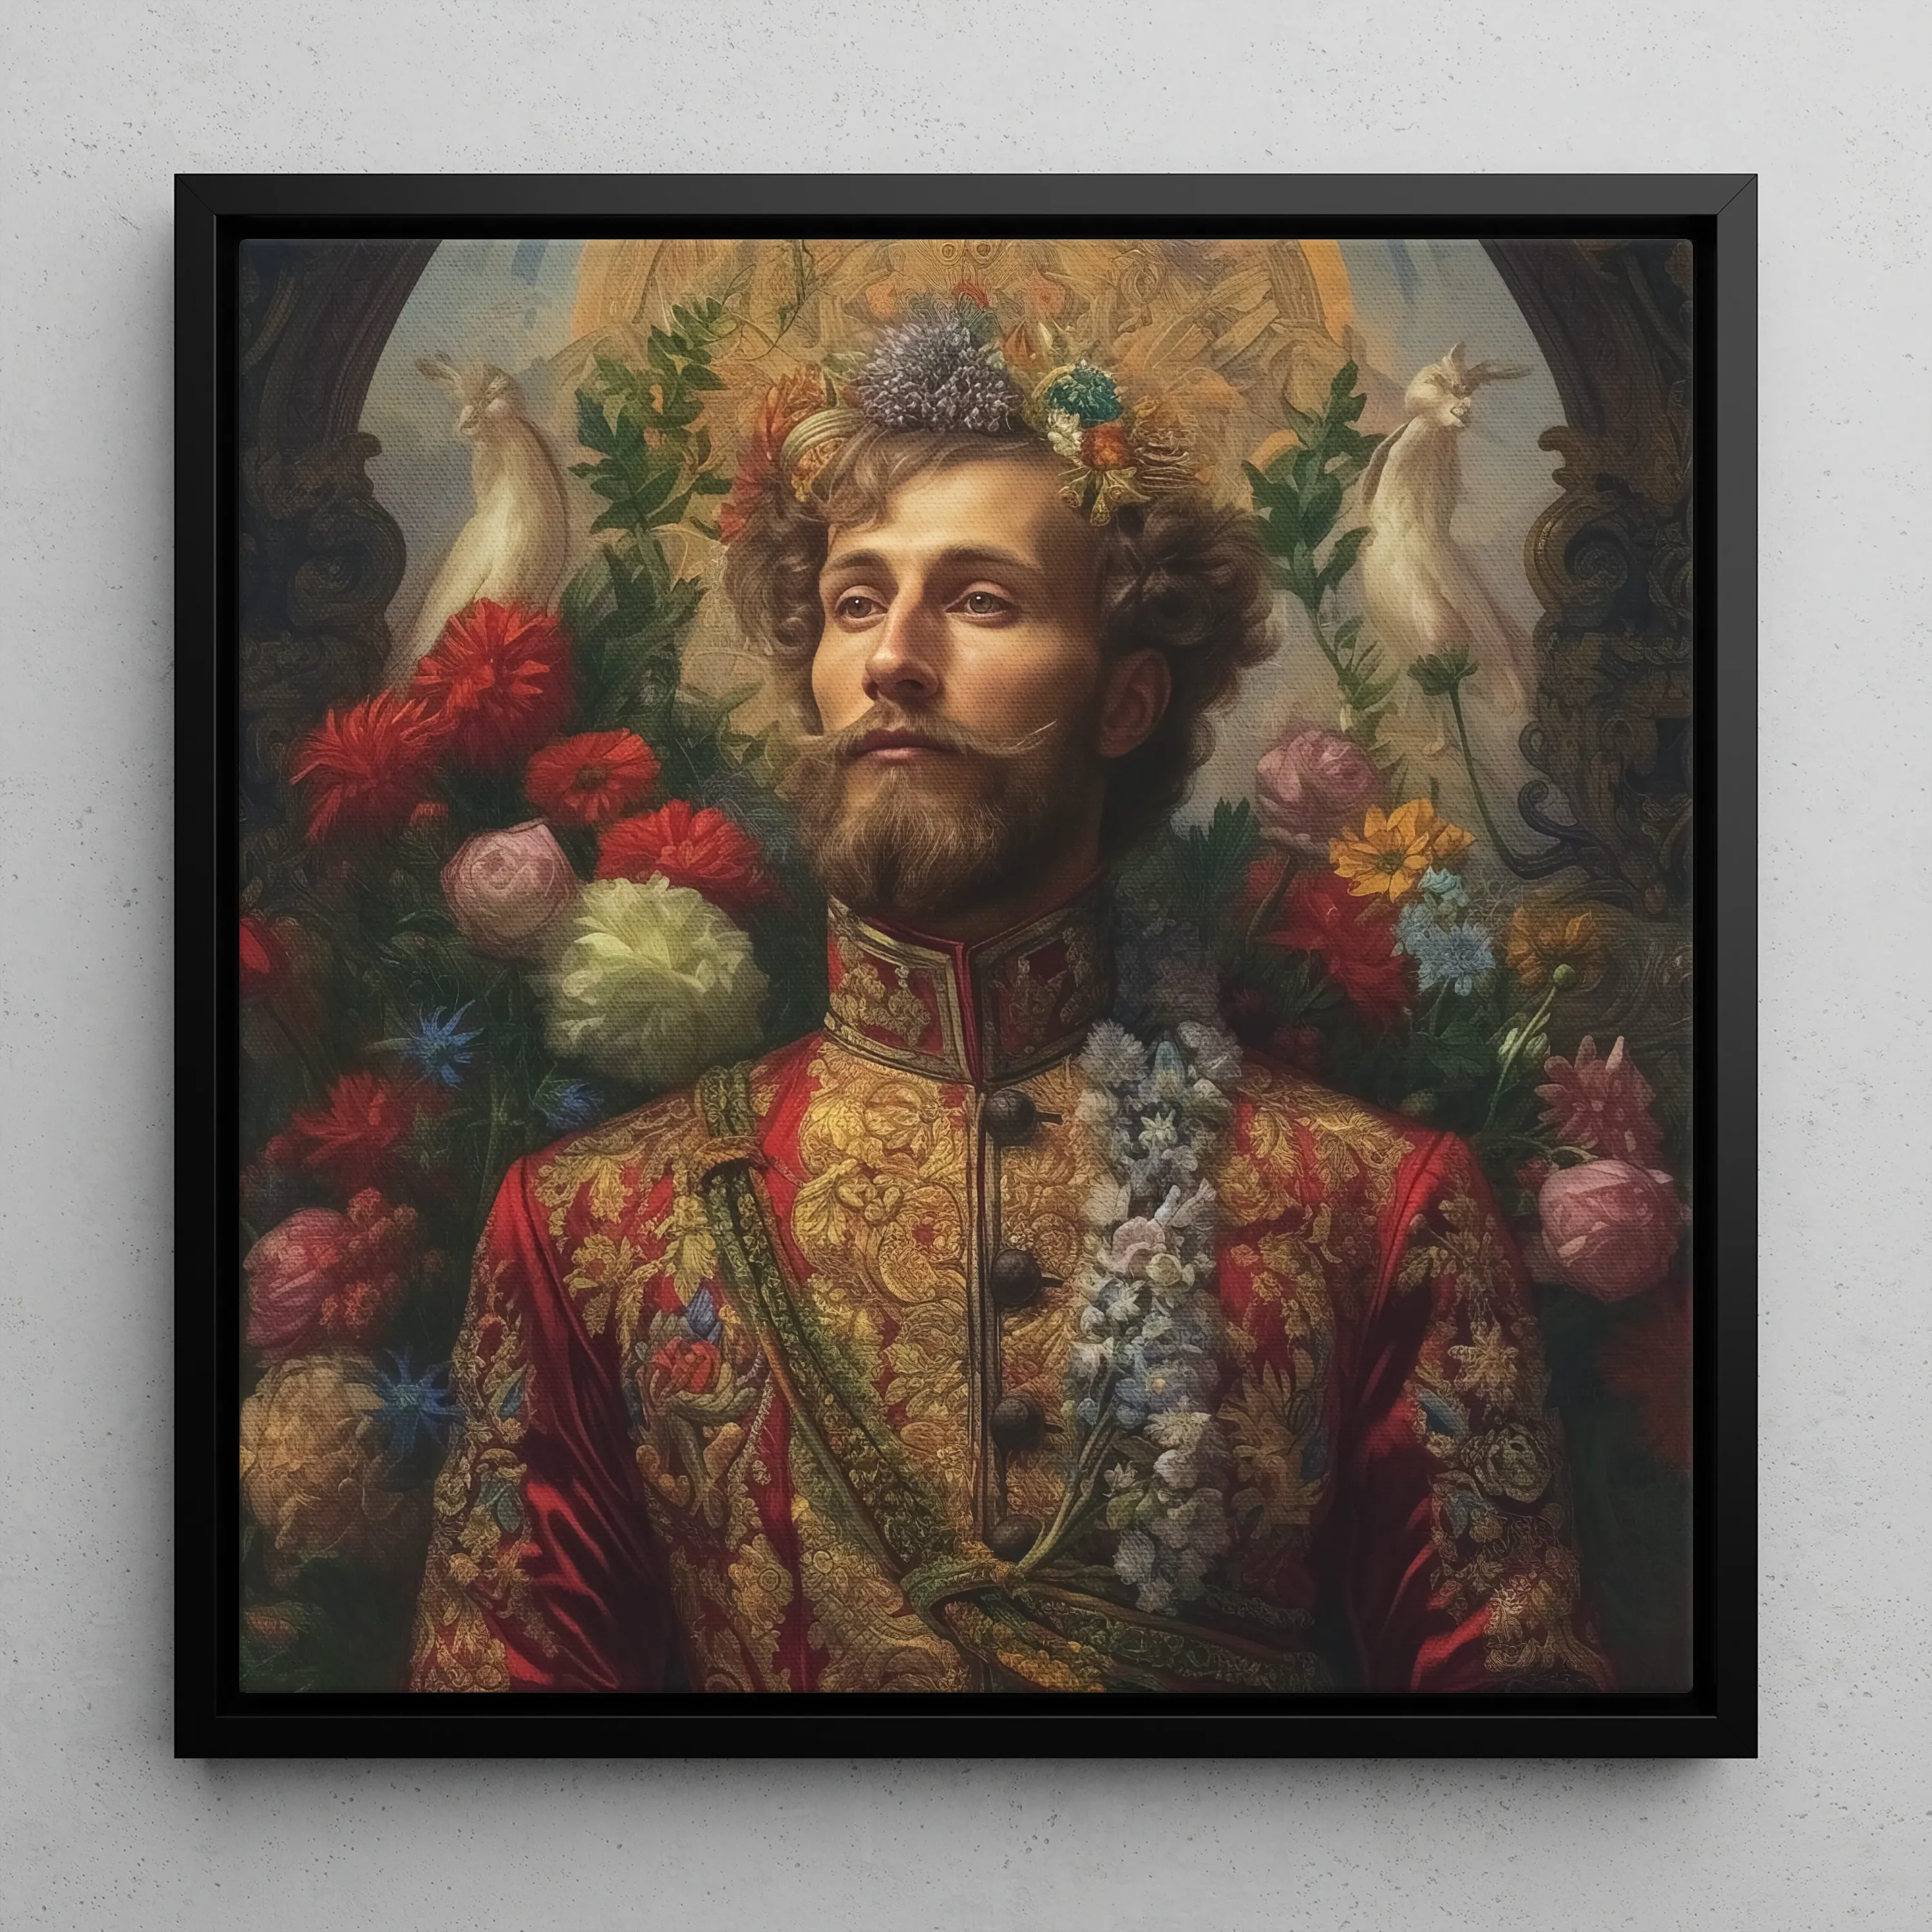 Prince Fyodor - Gay Russian Royalty Queerart Framed Canvas - 16’x16’ - Posters Prints & Visual Artwork - Aesthetic Art